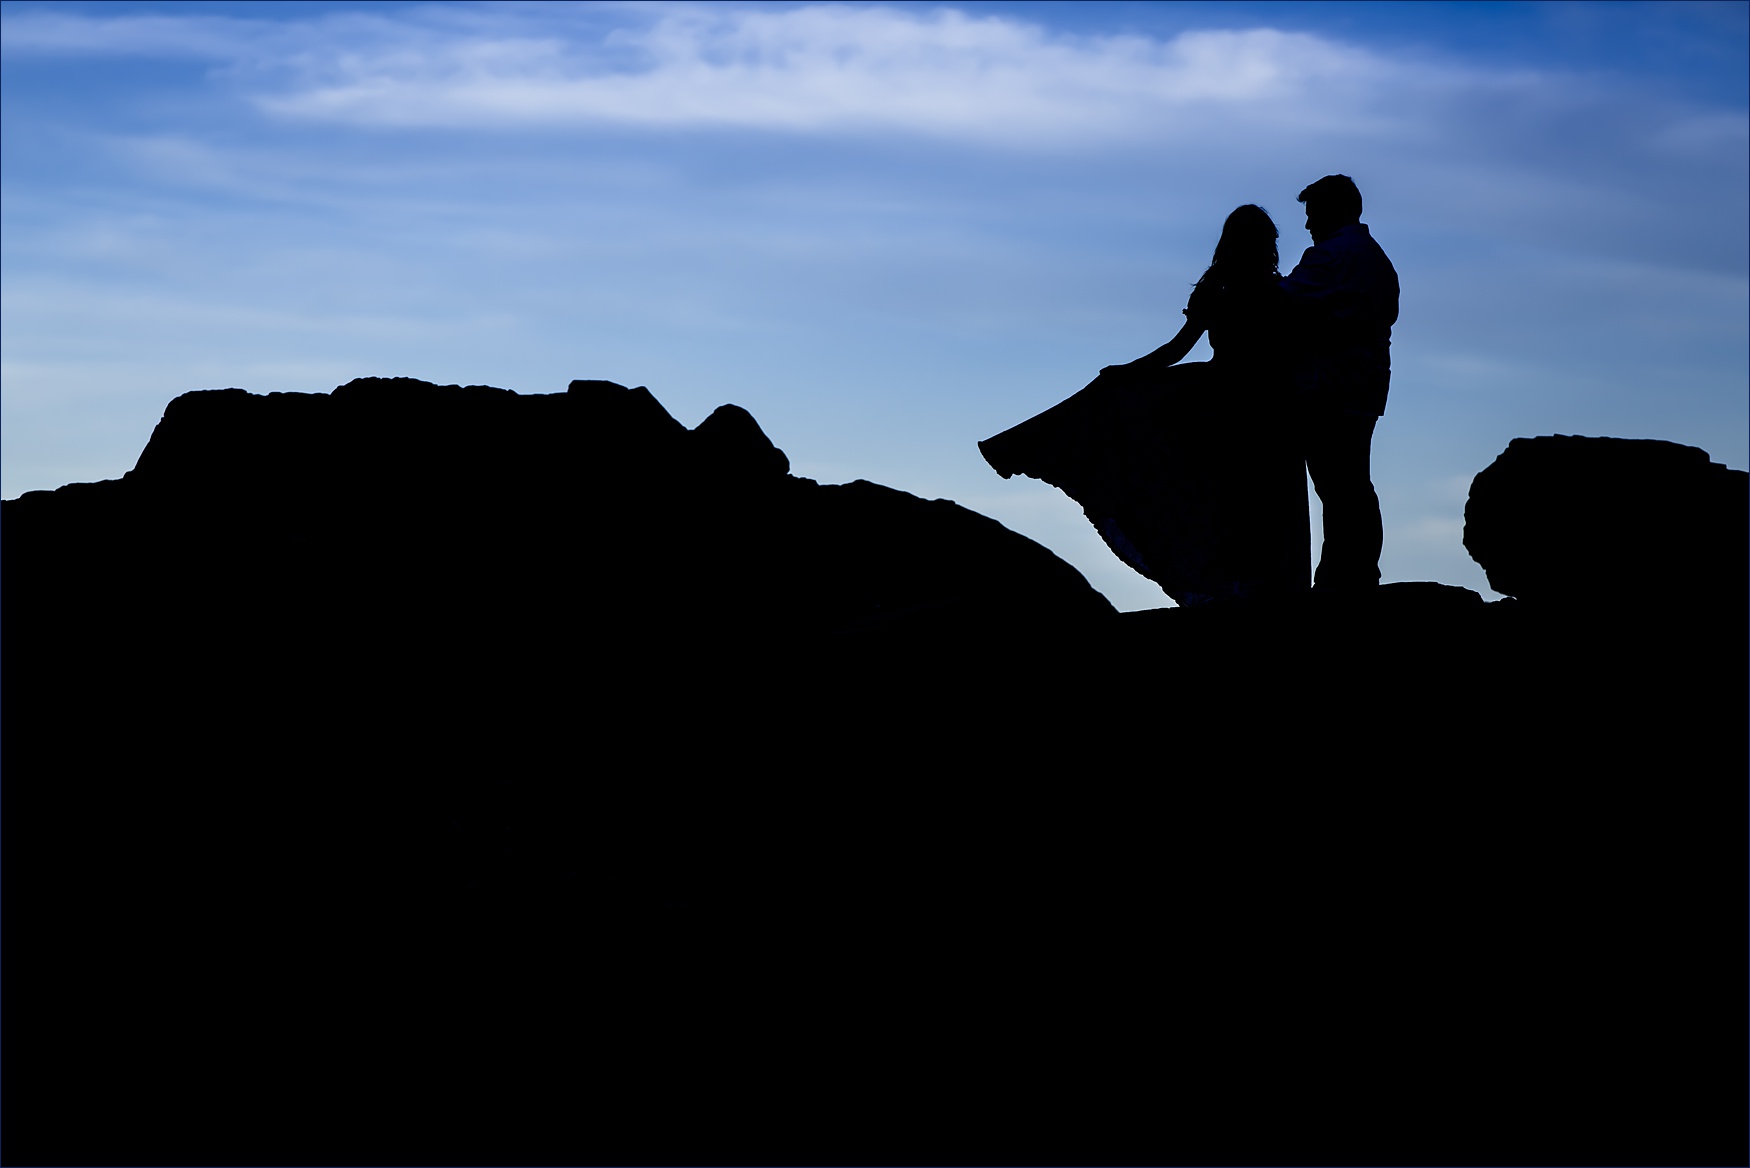 The couple stand on the rocks with a brilliant blue sky at The Cliff House in Maine